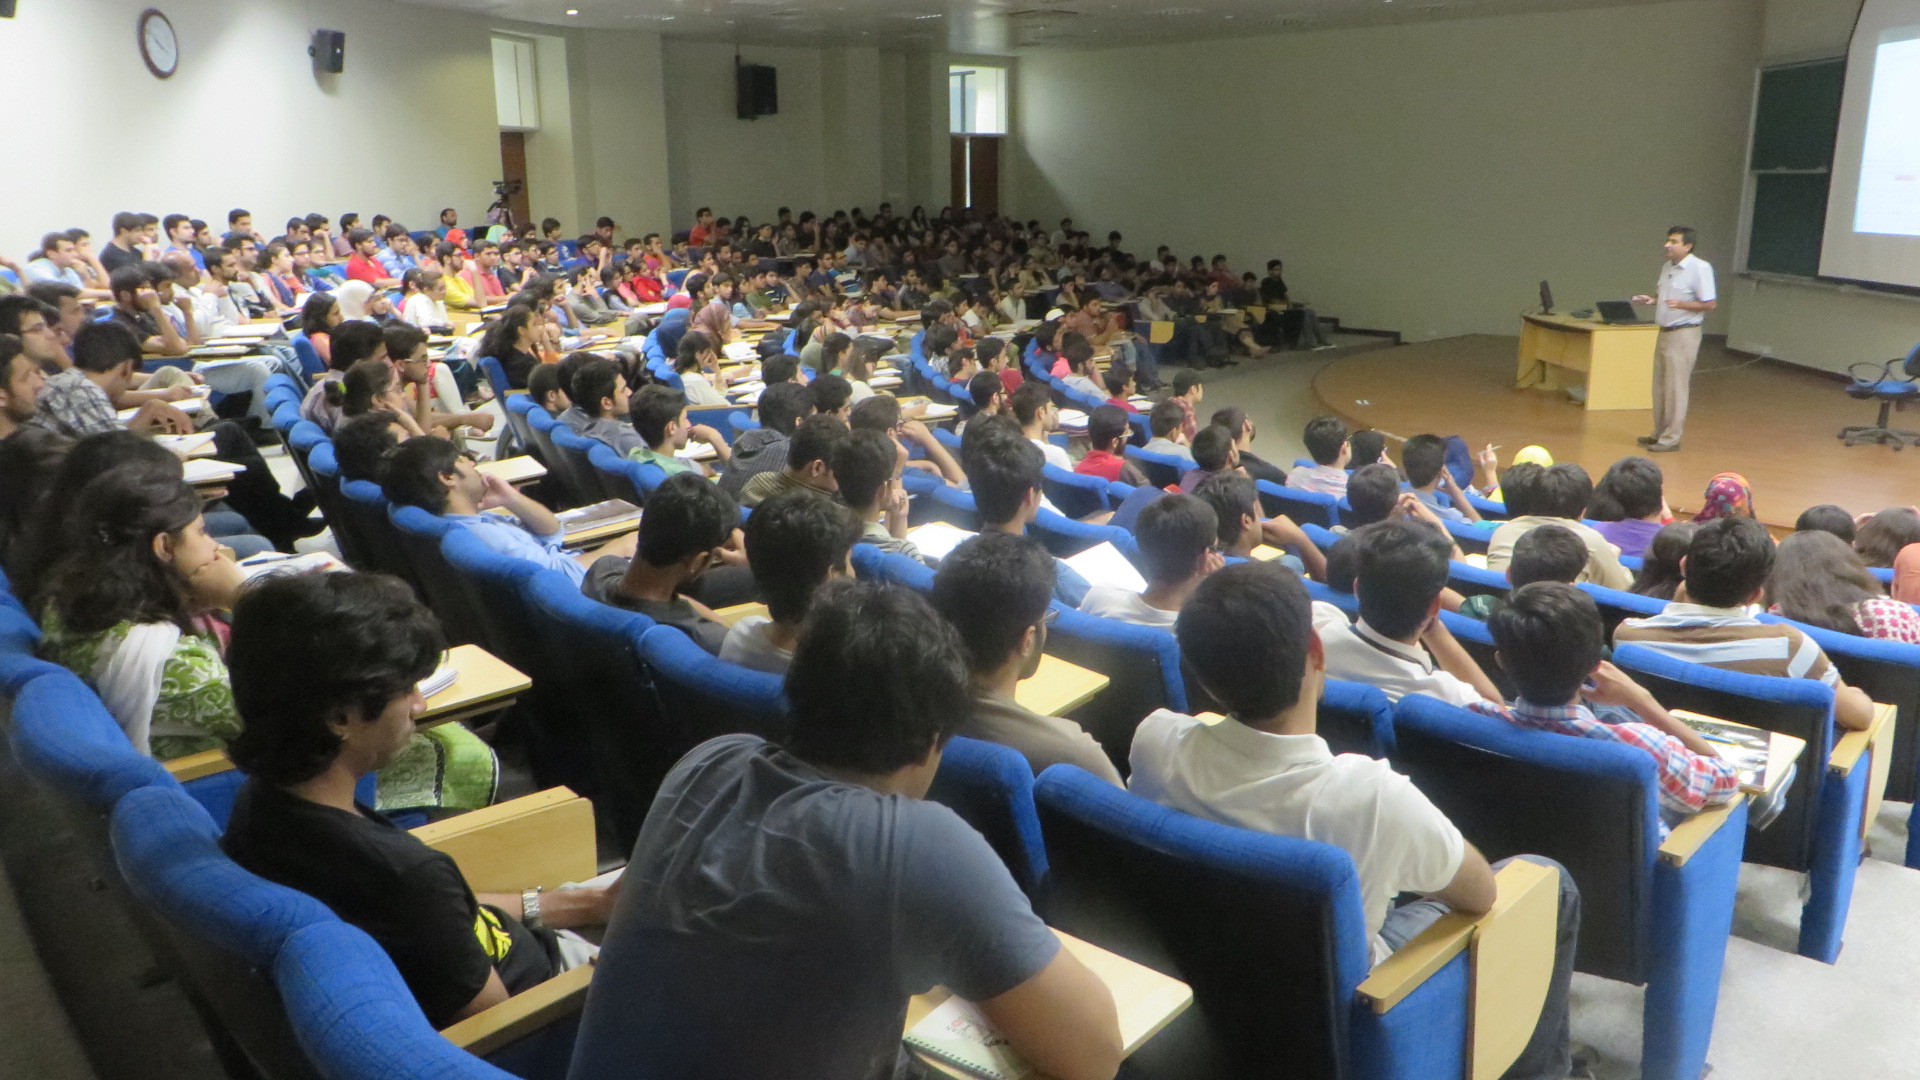 Dr. Sabieh welcomes batch 2019 to Physlab